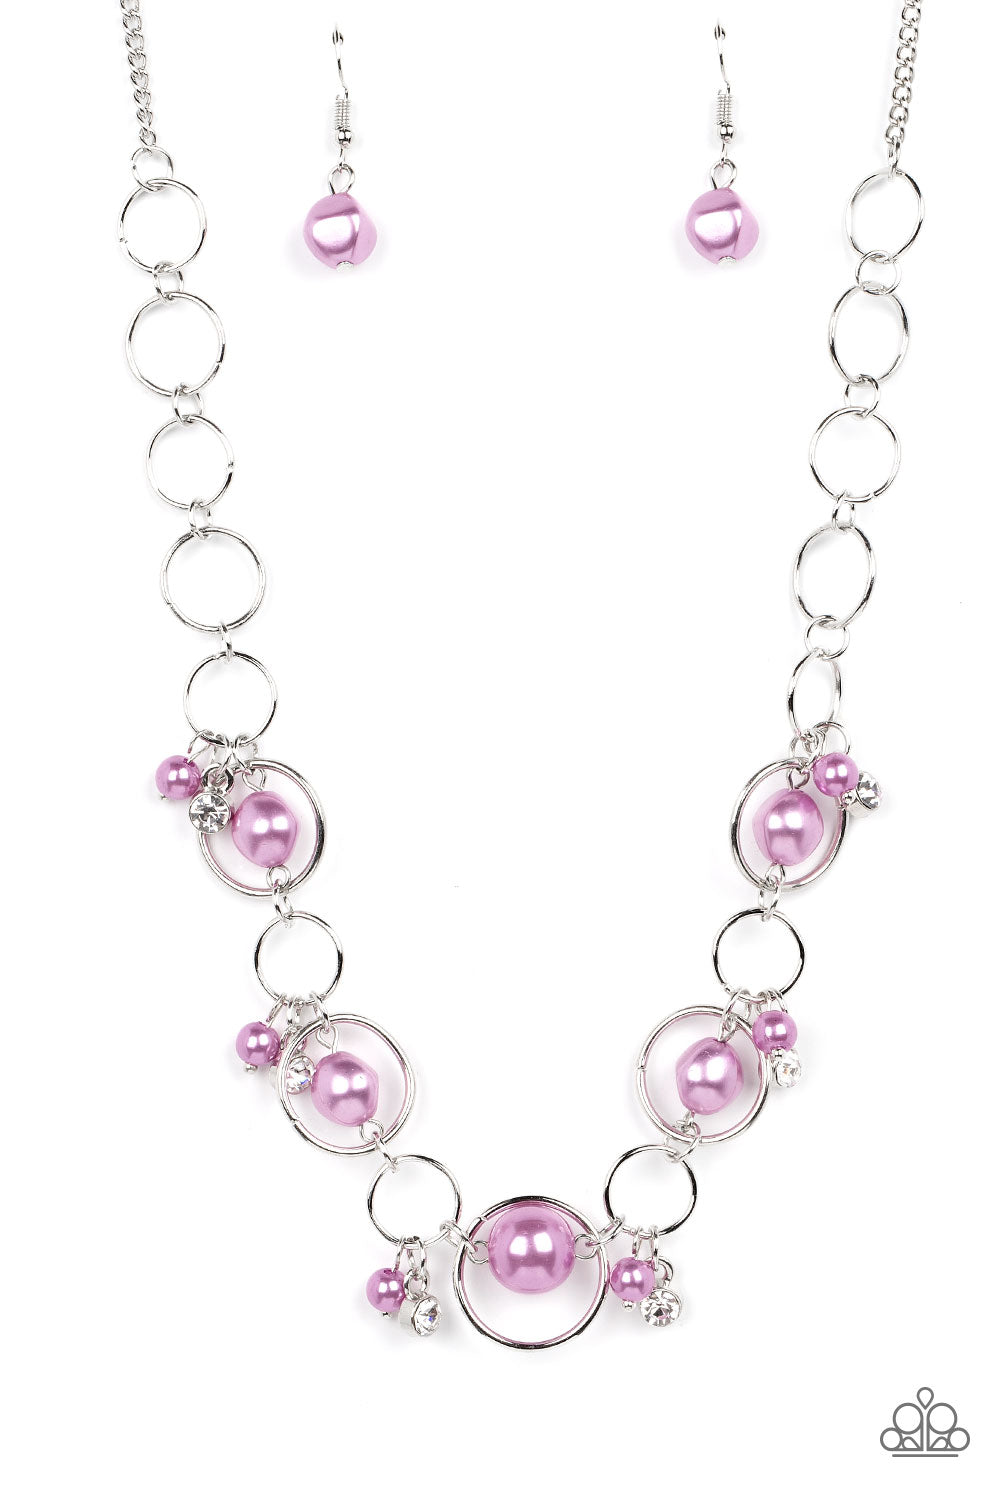 Think of the POSH-ibilities! - Purple Pearls & Silver Ring Paparazzi Necklace & matching earrings